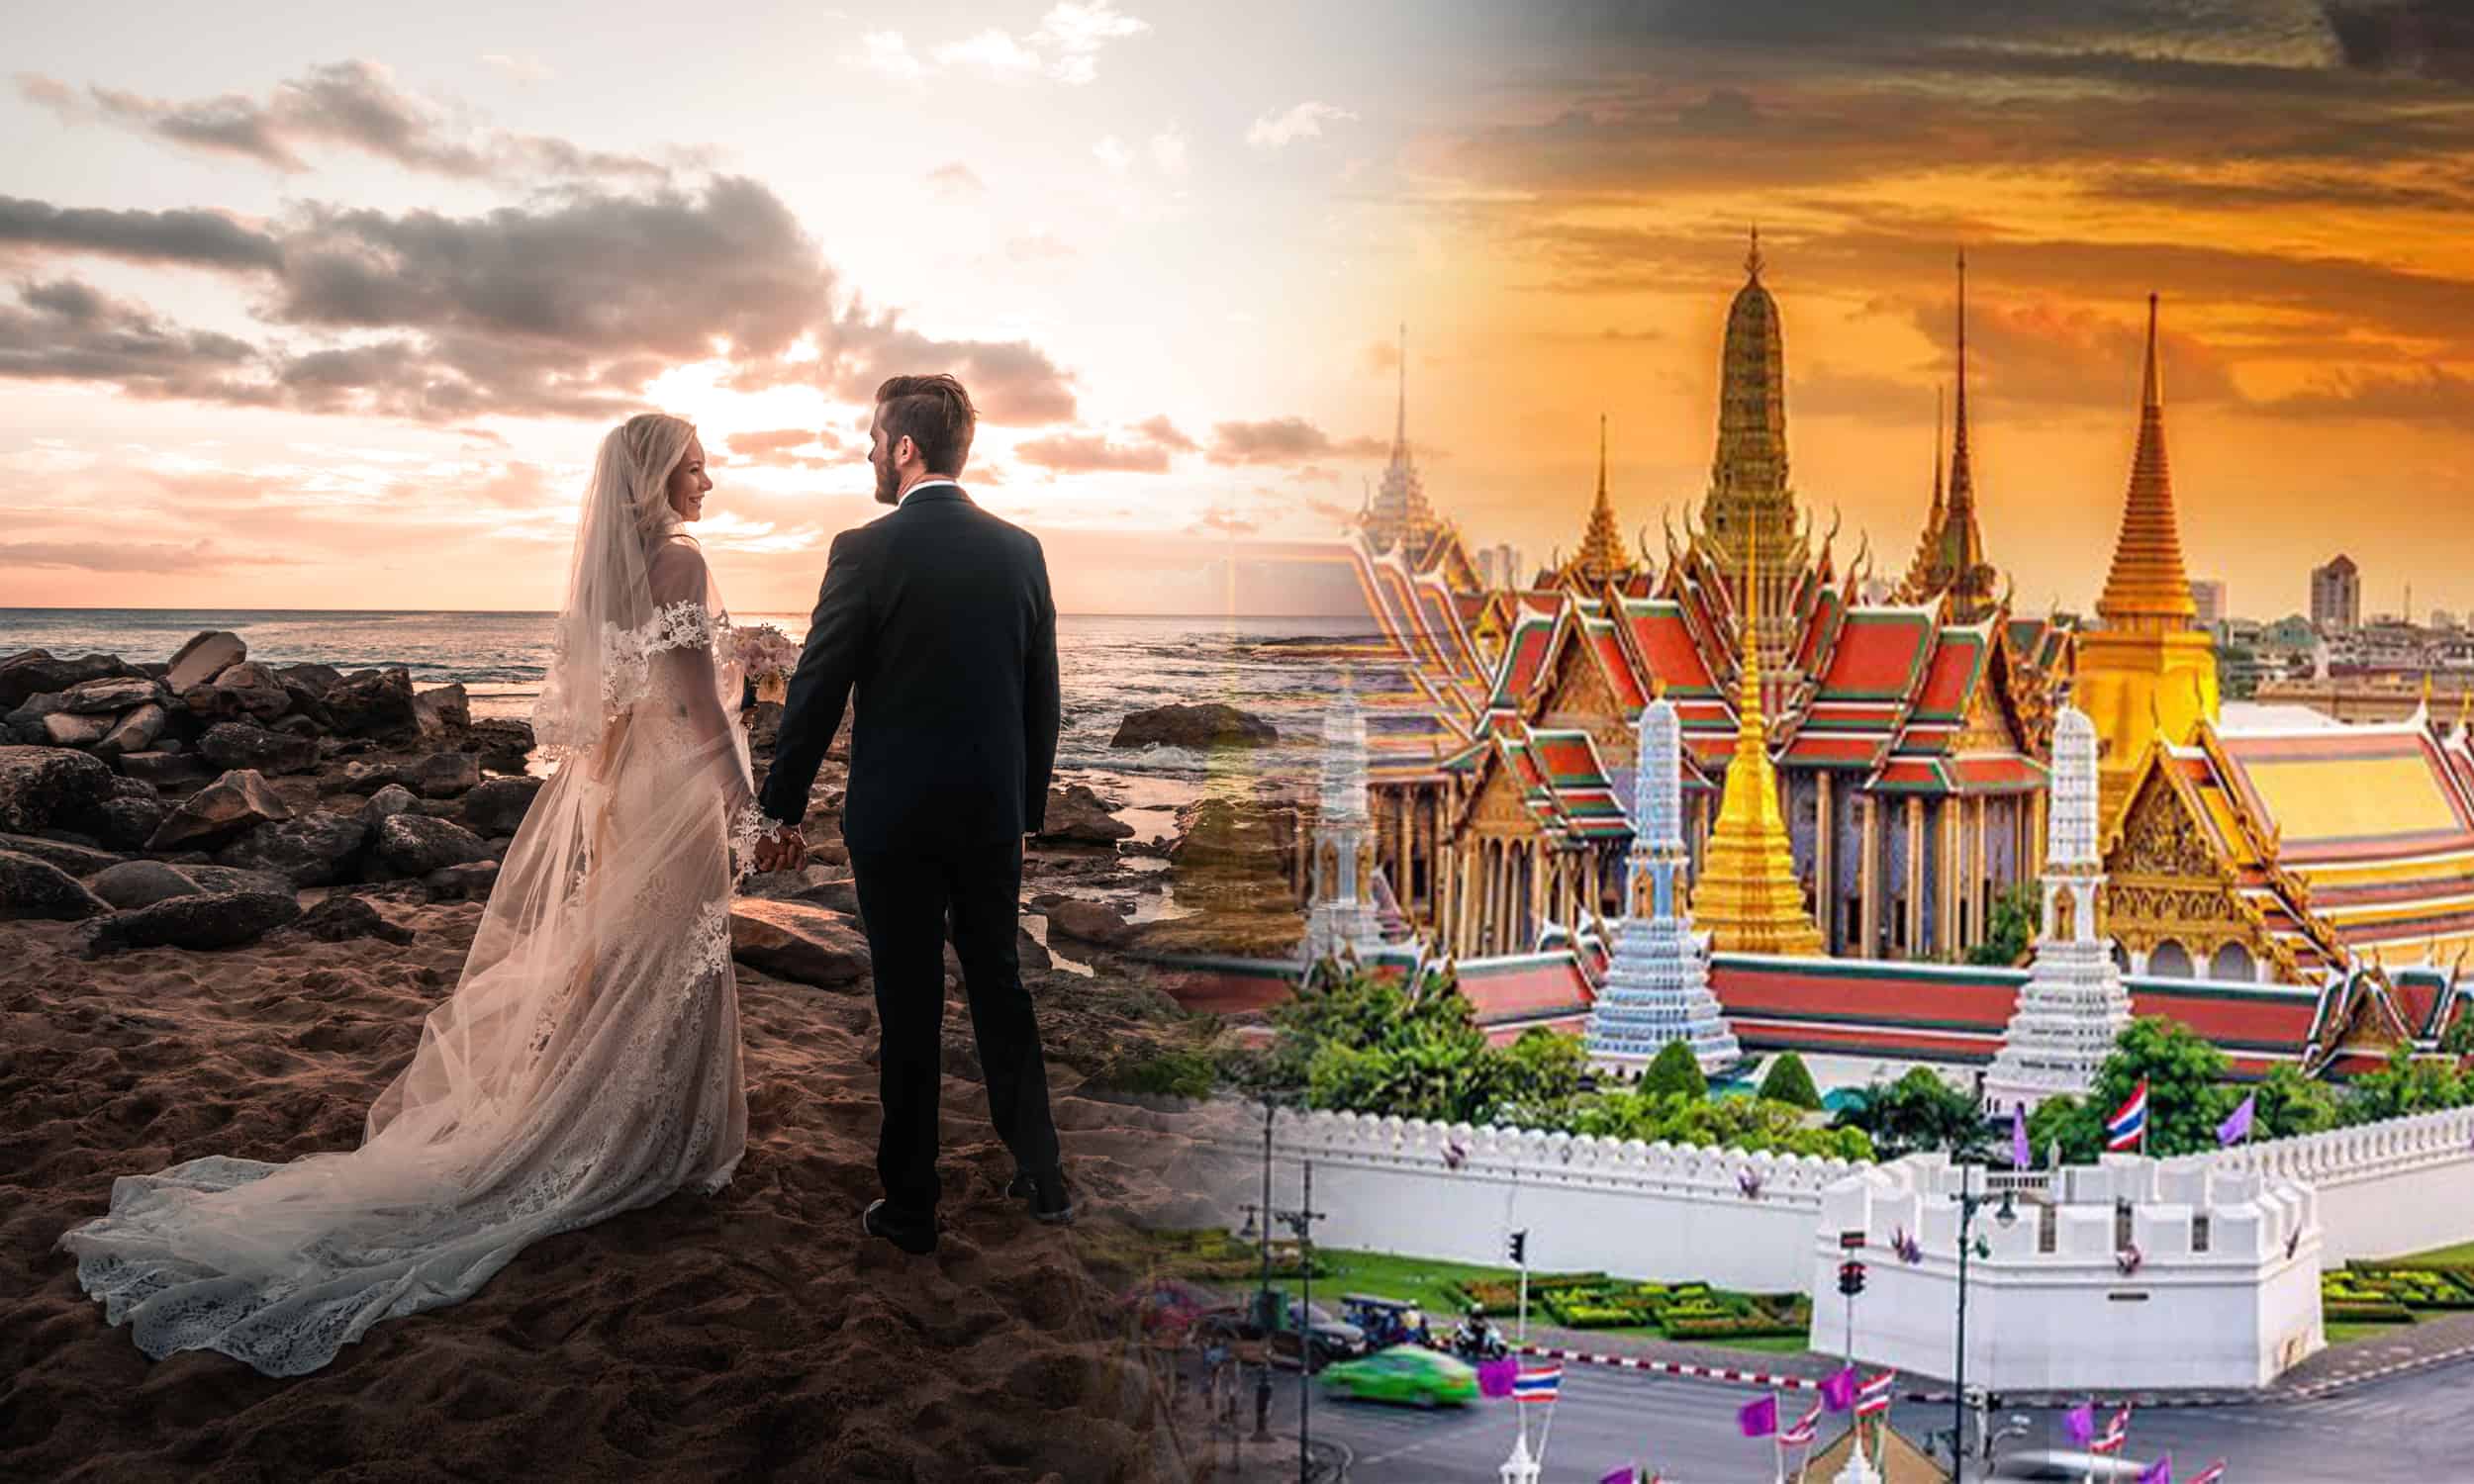 Thailand wedding scene showing a couple in wedding attire holding hands on a sunset beach on the left and a traditional Thai temple complex with gold and red roofs on the right.